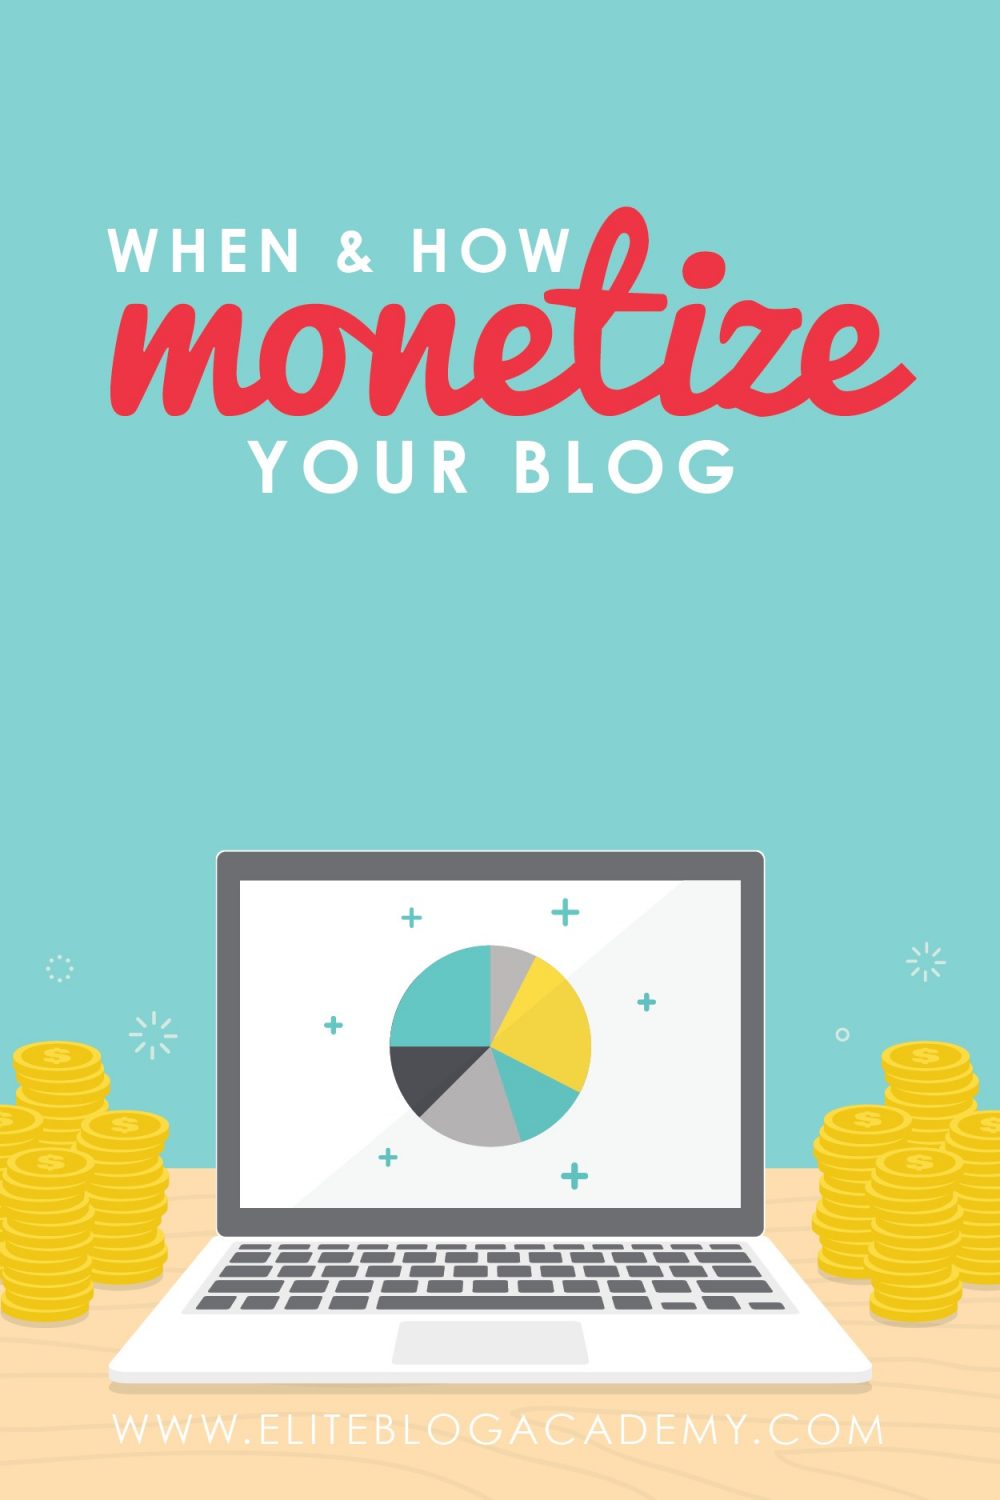 Are you hesitant to start monetizing your blog? For your blog to become a business, it has to make money! If you’re unsure, don’t miss these tips on turning your blog into a money making machine.